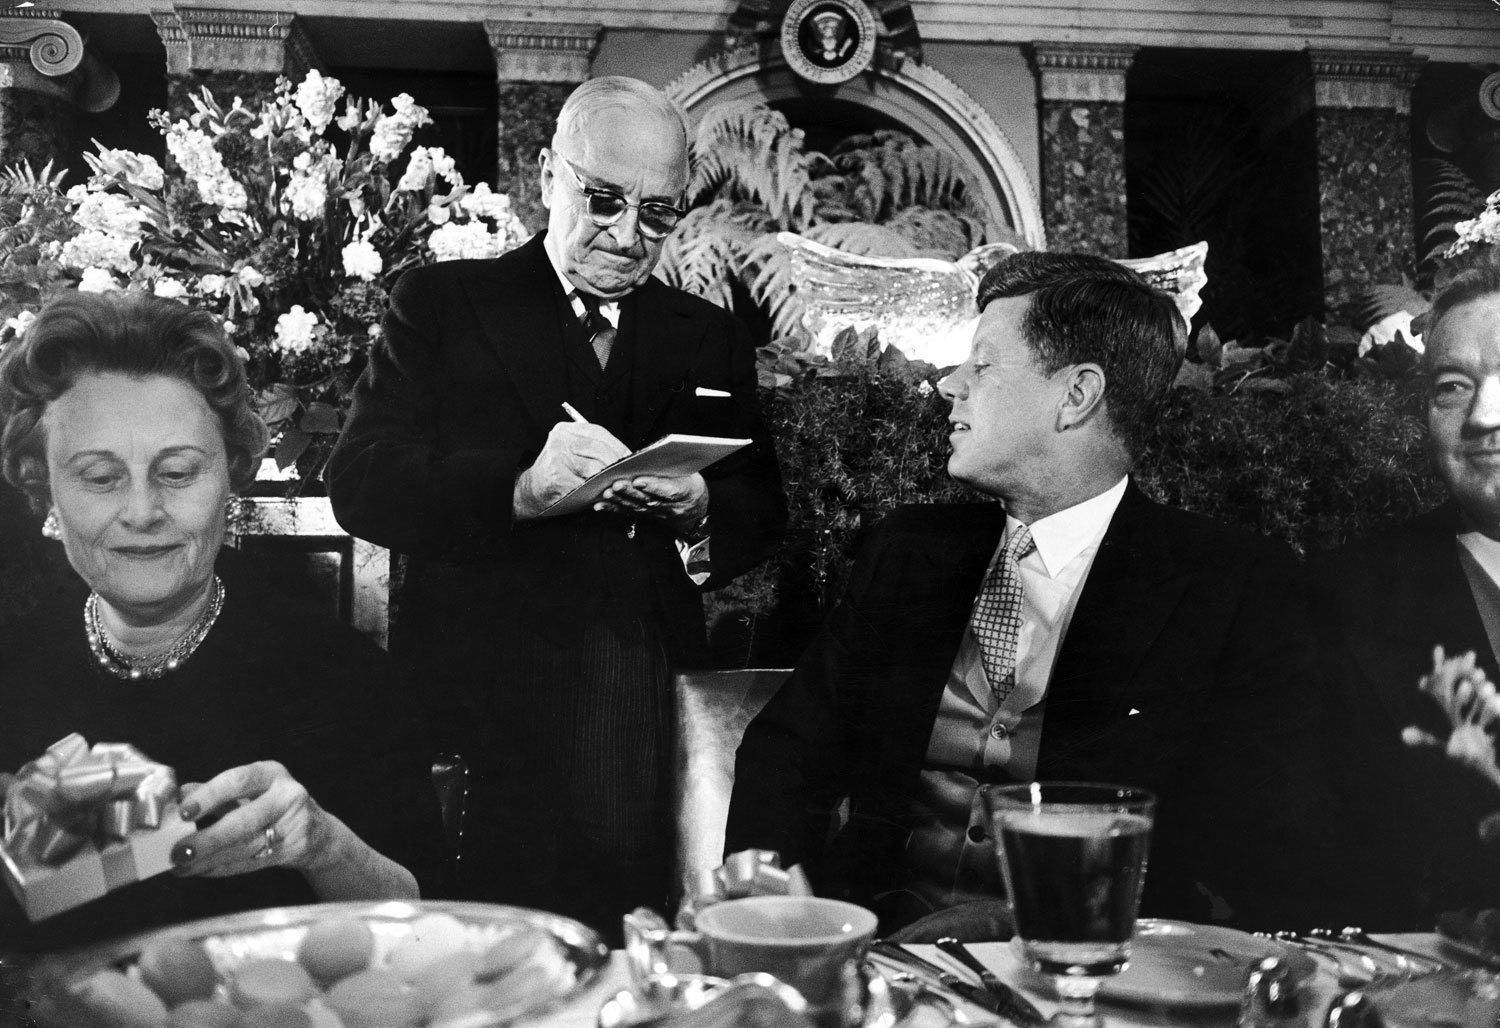 President Harry Truman signs President John Kennedy's program at a luncheon after JFK's inauguration, 1961.